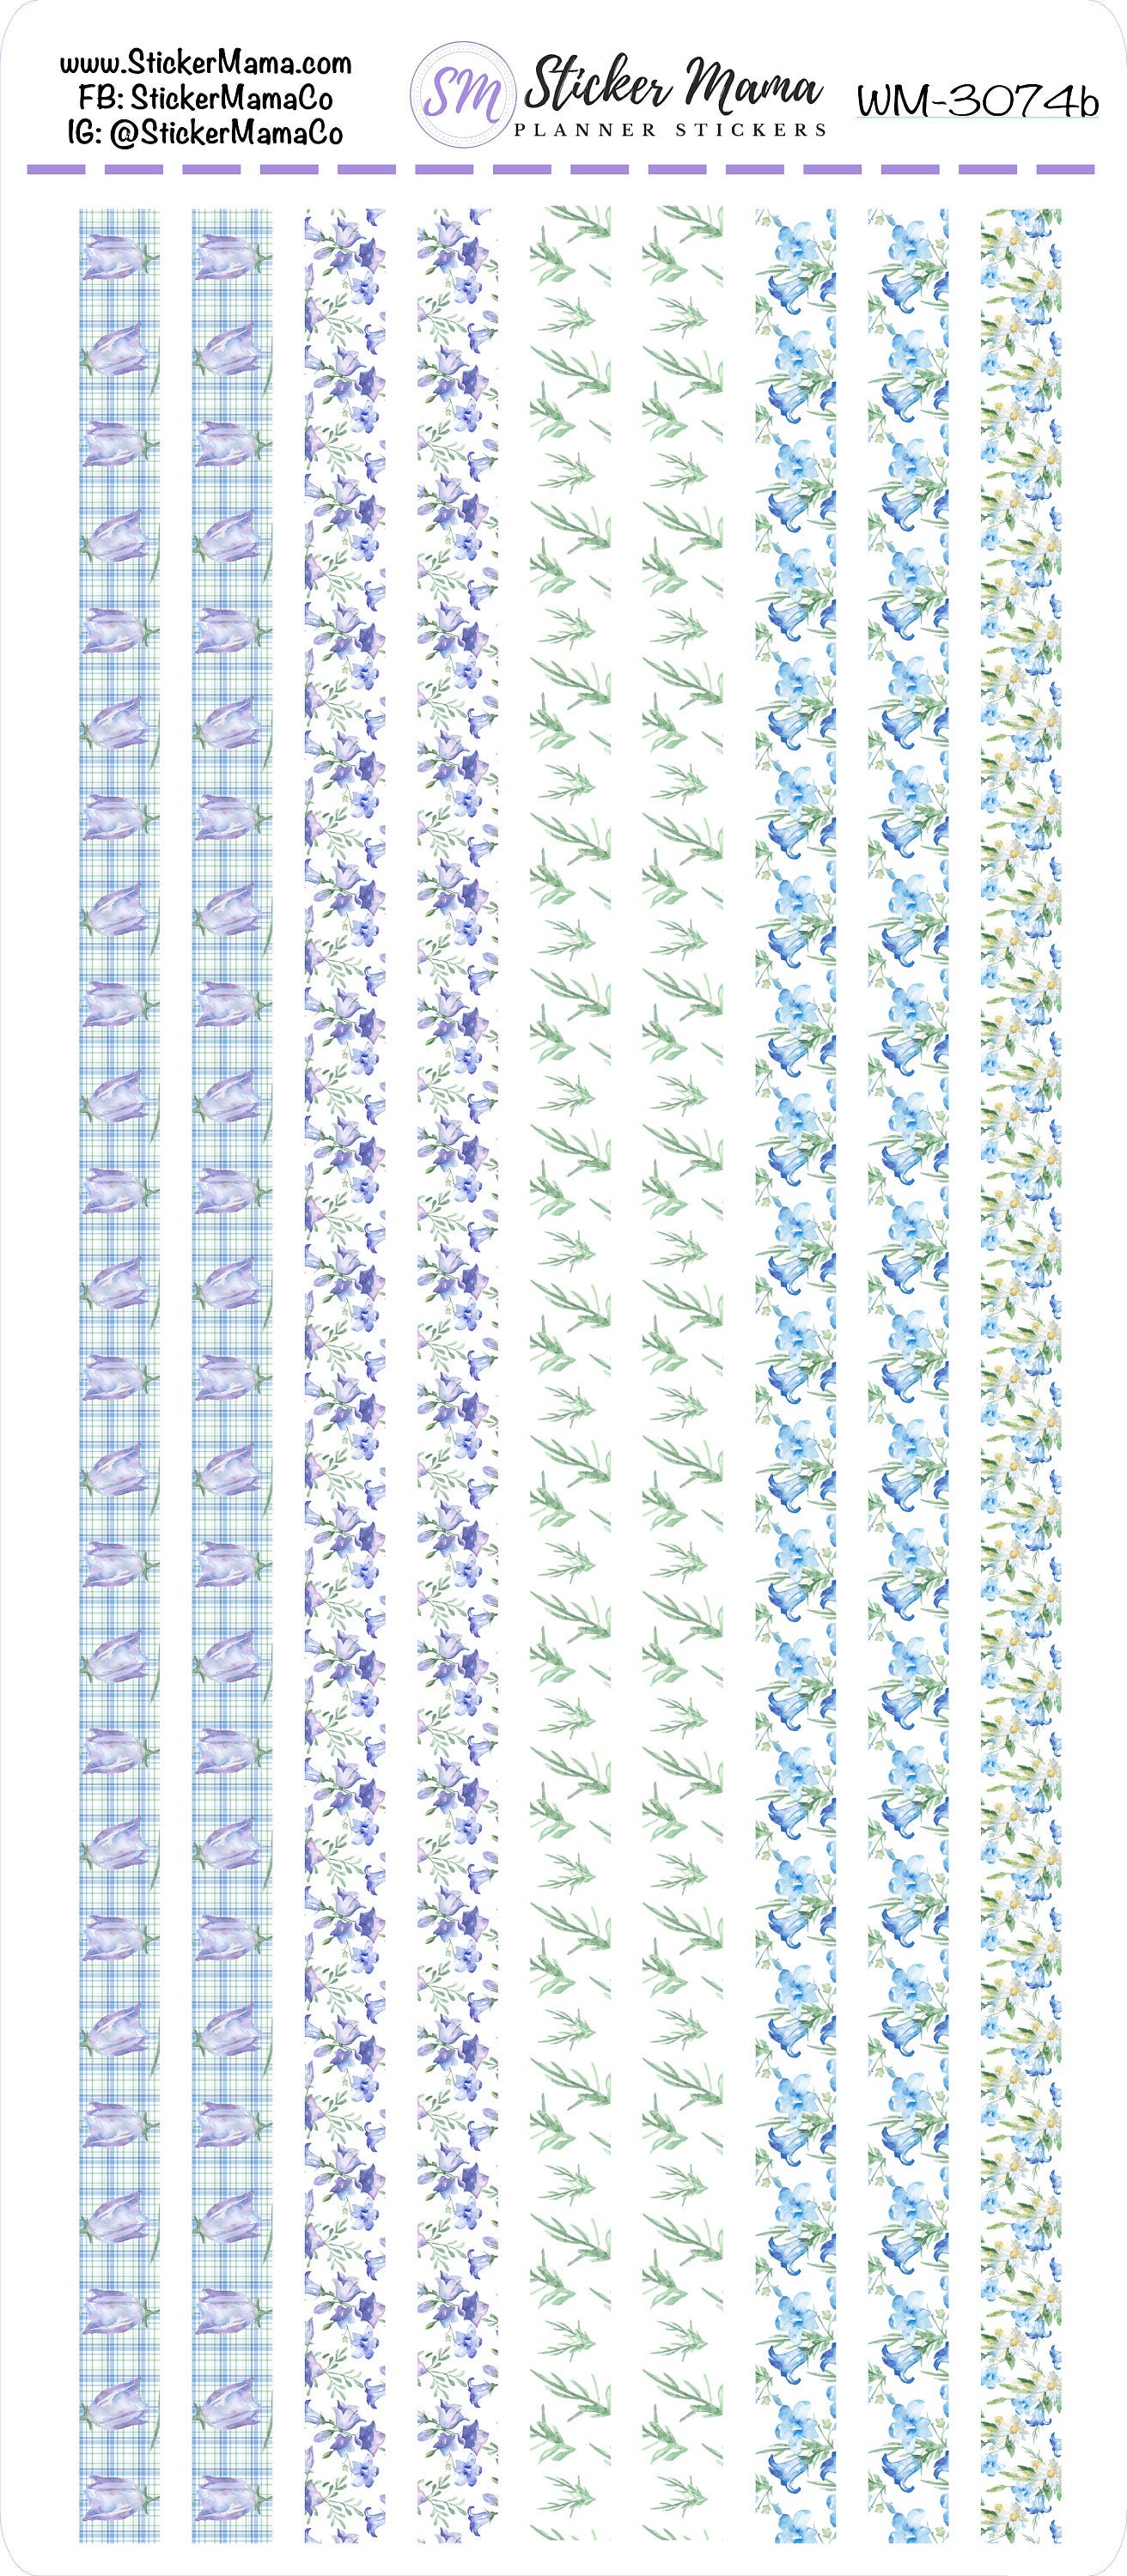 W-3074 - WASHI STICKERS - Bellfowers - Planner Stickers - Washi for Planners